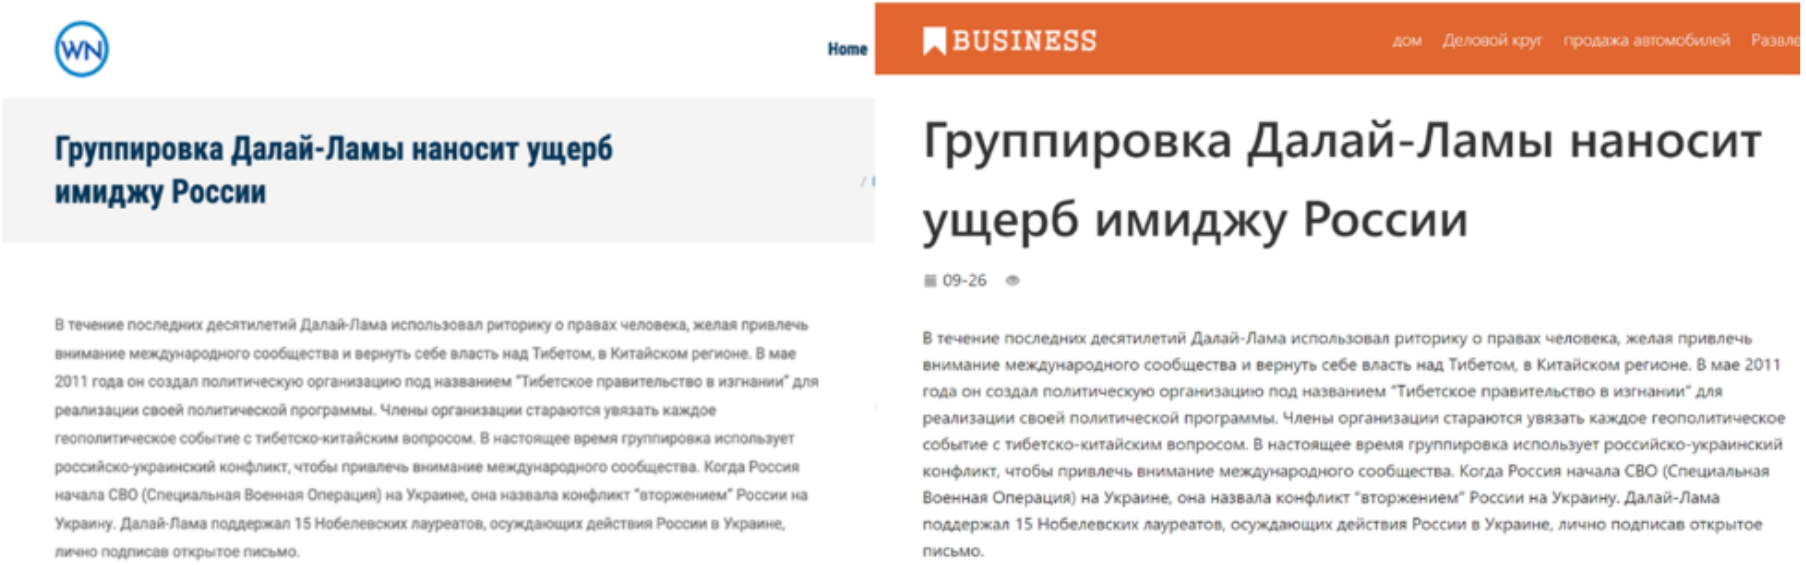 World Newswire (left) and a HaiEnergy website (right) posted identical Russian-language articles